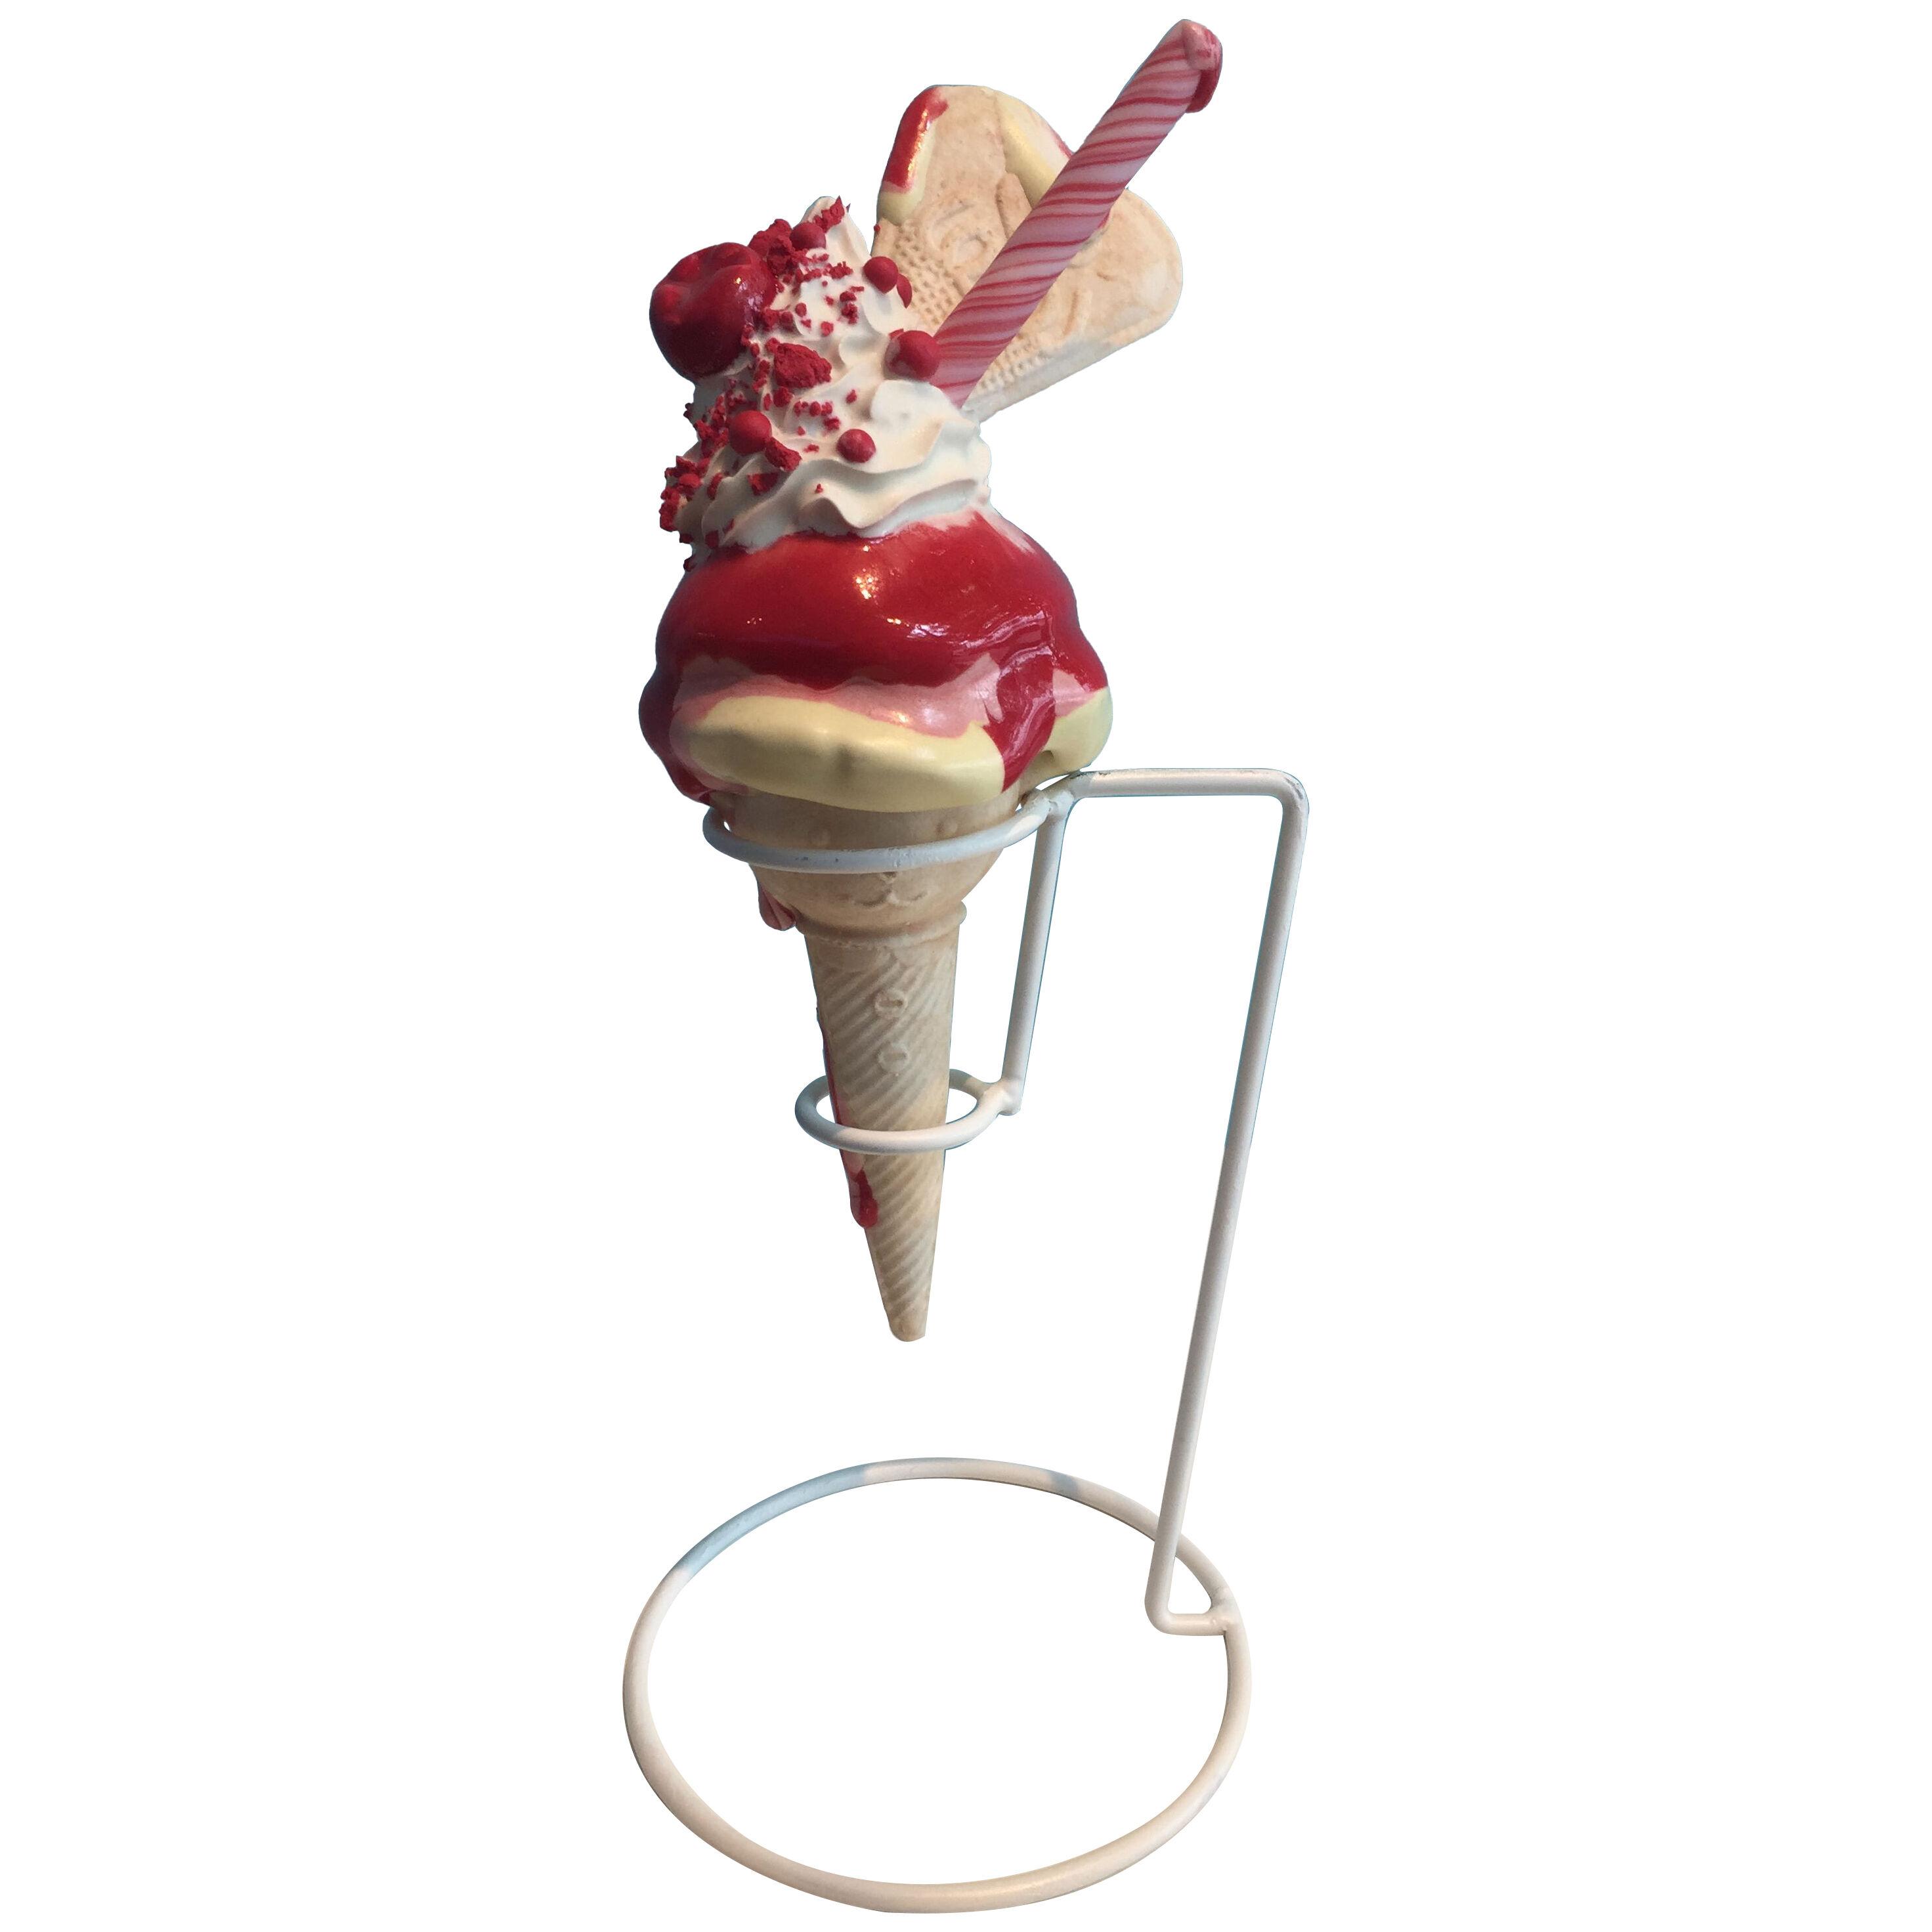 'Candy Cane Cone' on Stand, Contemporary Ceramic Sculpture by Anna Barlow